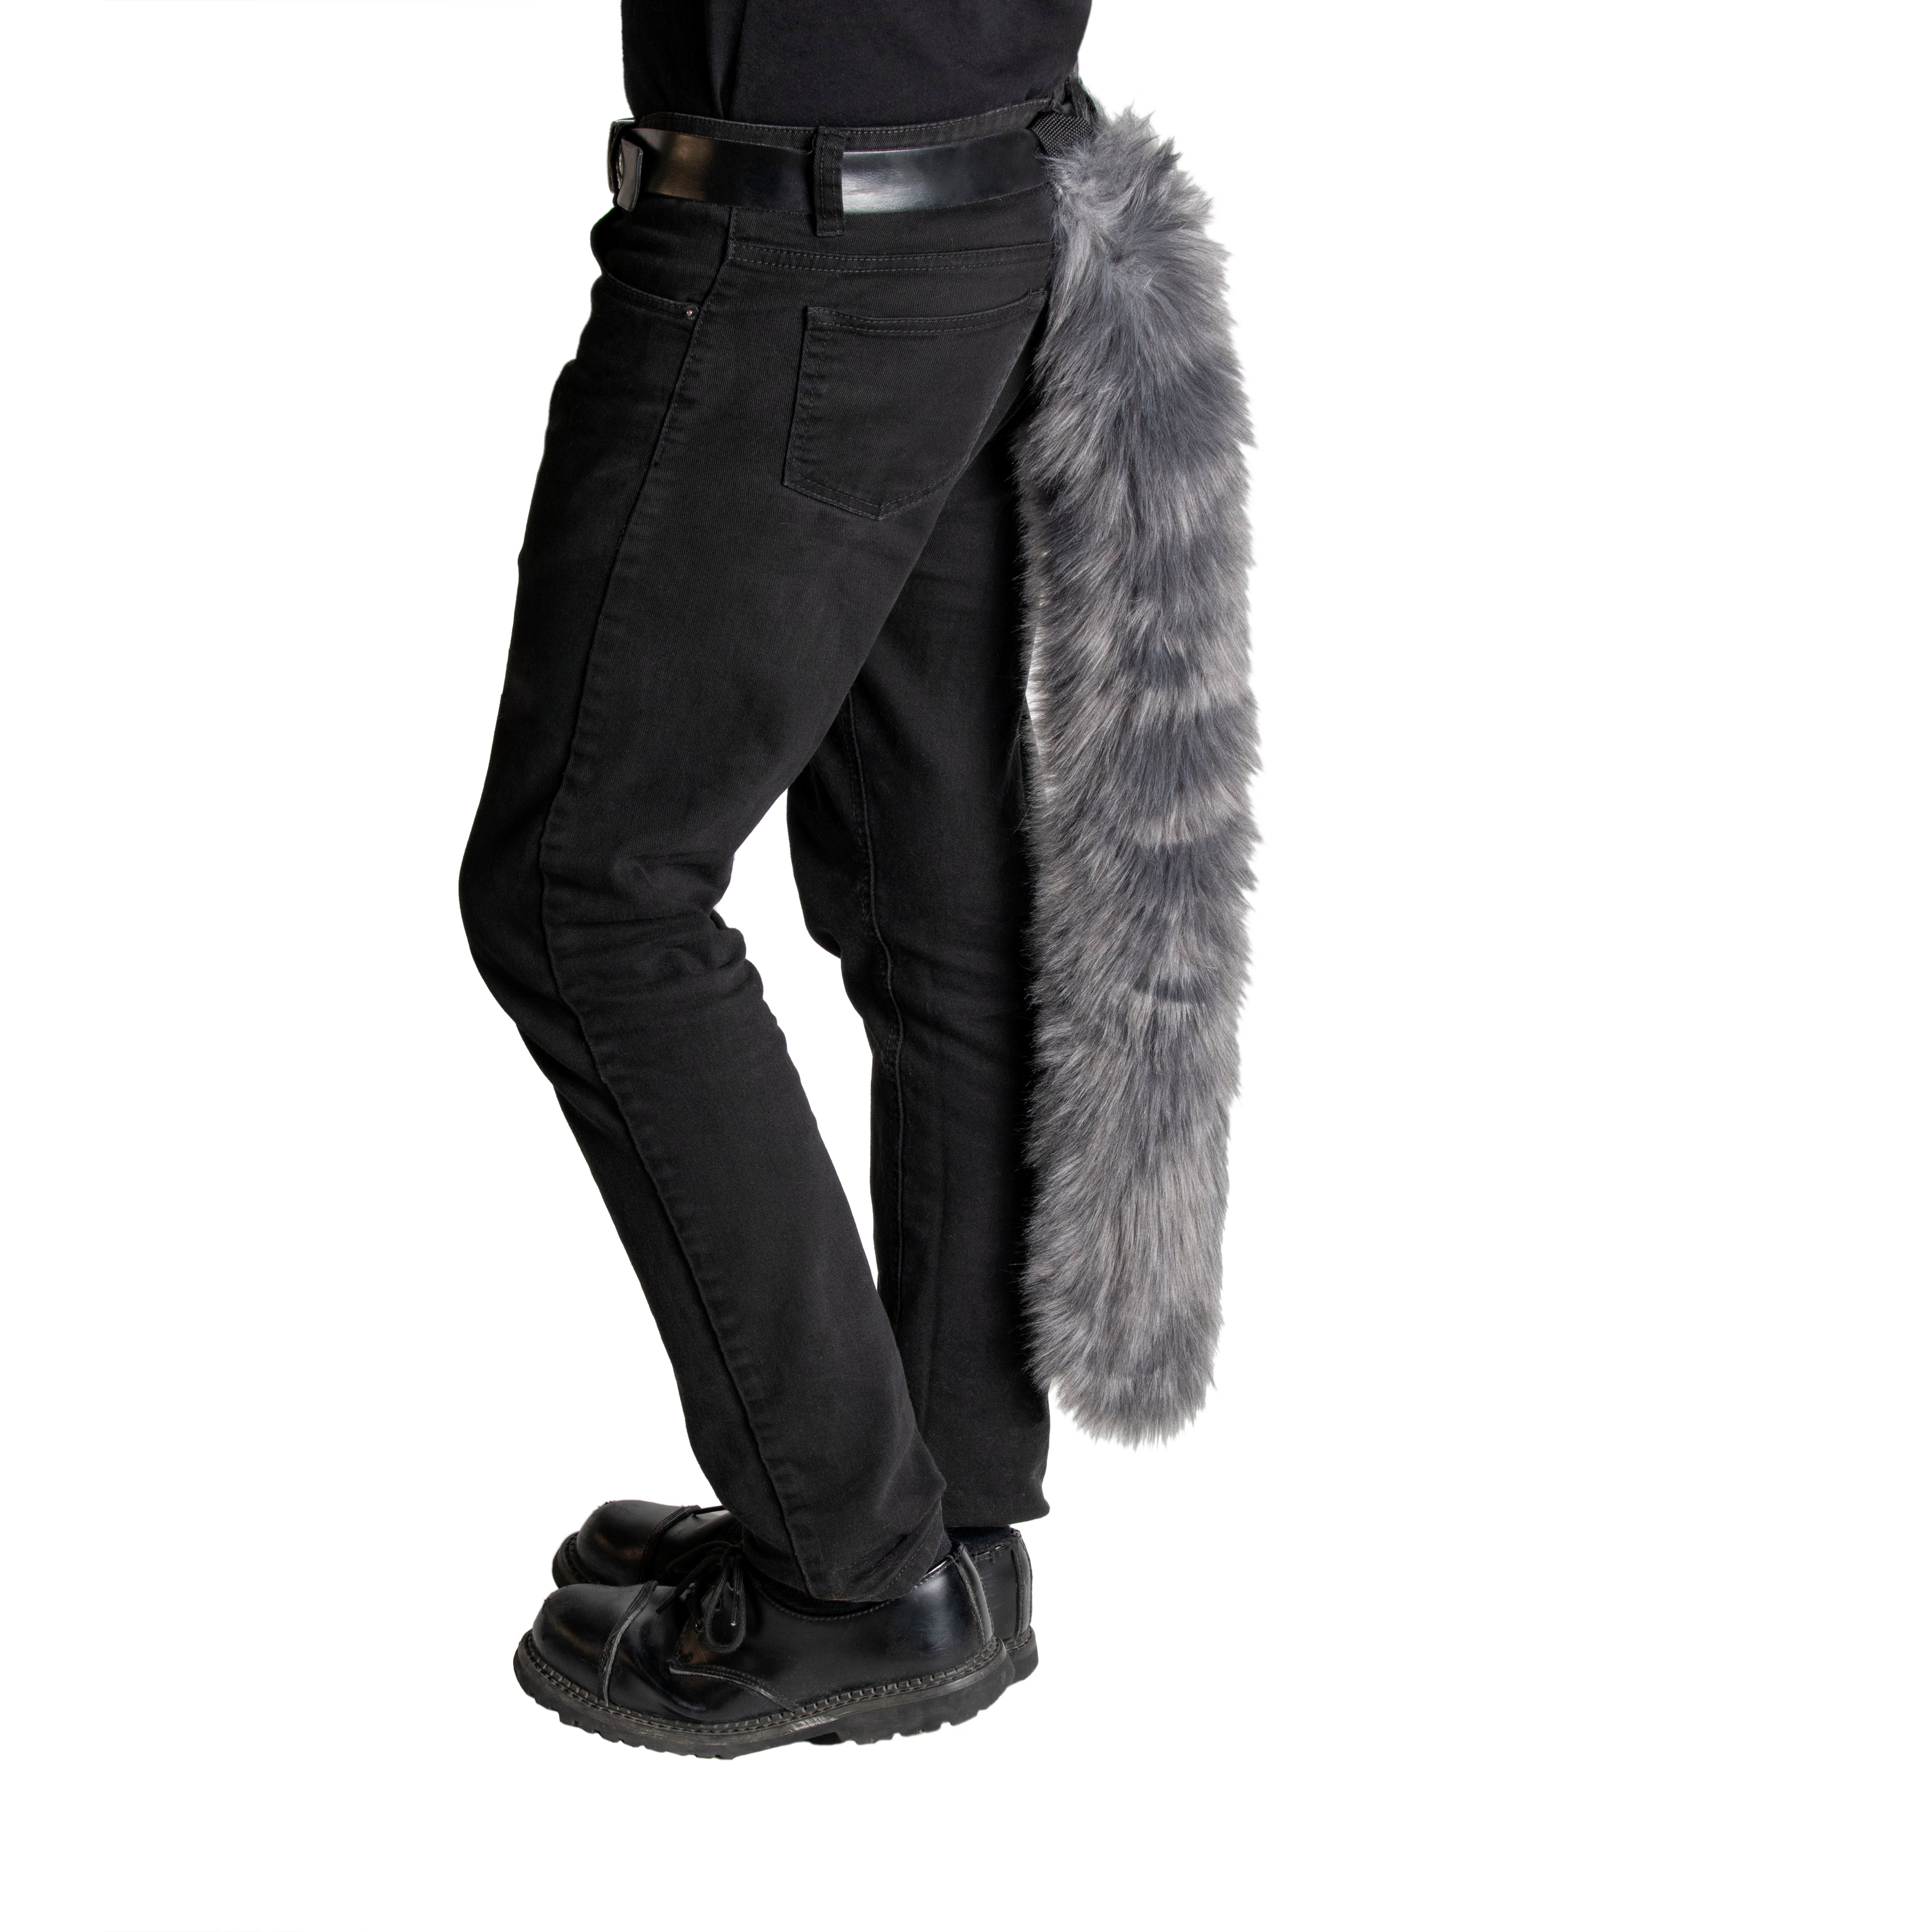 gray kitty cat feline costume tail made of faux fur. Fluffy furry and perfect for Halloween.